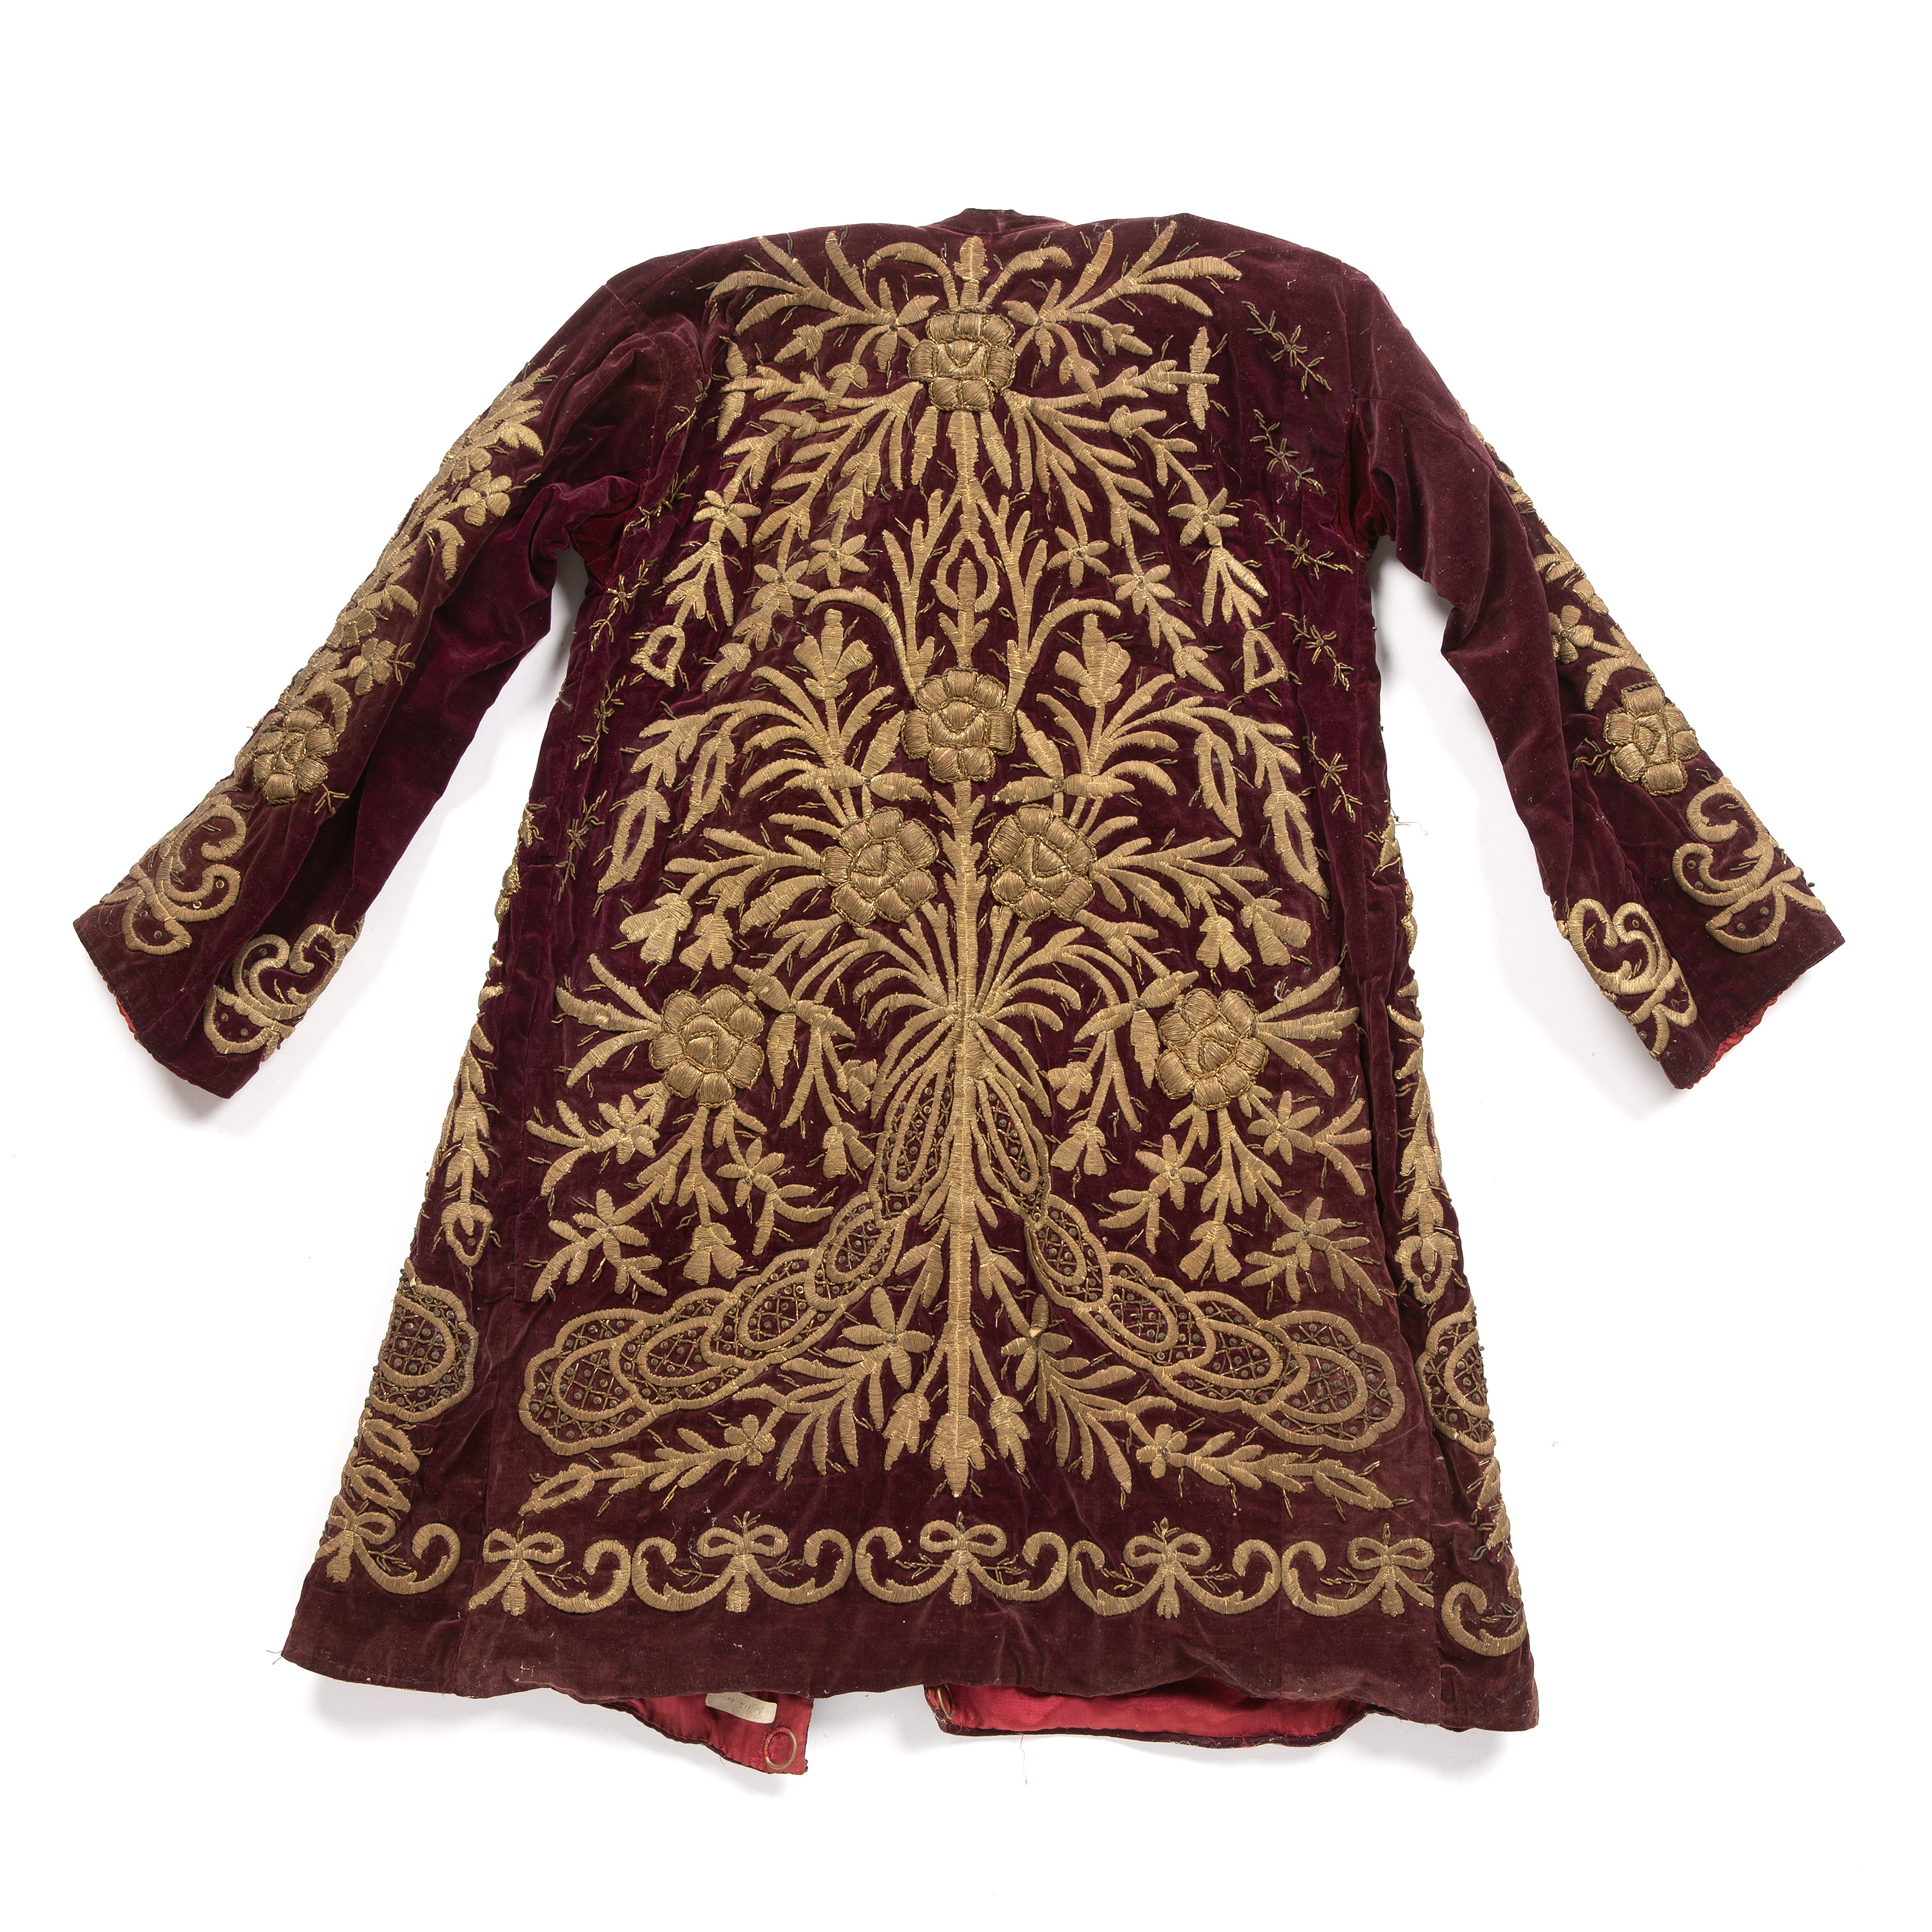 Embroidered velvet coat Ottoman deep burgundy ground, embroidered in gold with flowers and - Image 2 of 2